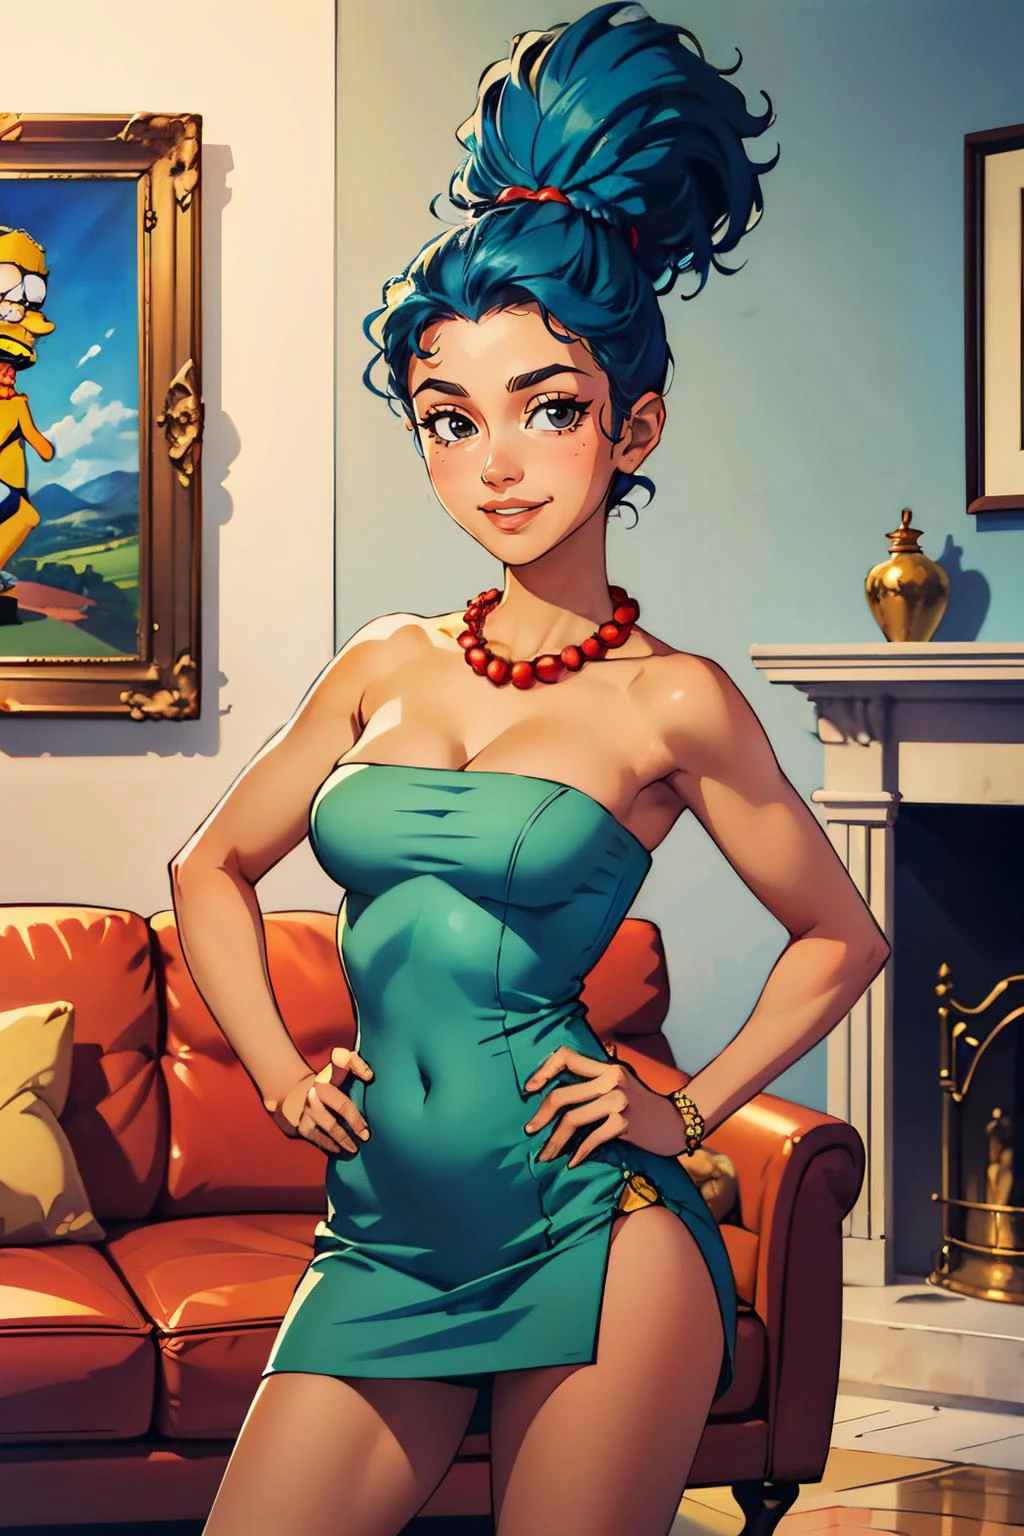 margesimpson, black eyes, yellow skin, afro, big blue hair, pearl necklace, strapless green dress, white panties, looking at viewer, smiling, standing, hand on hip, inside cozy living room, sofa, framed painting, playful ambiance, high quality, masterpiece,  